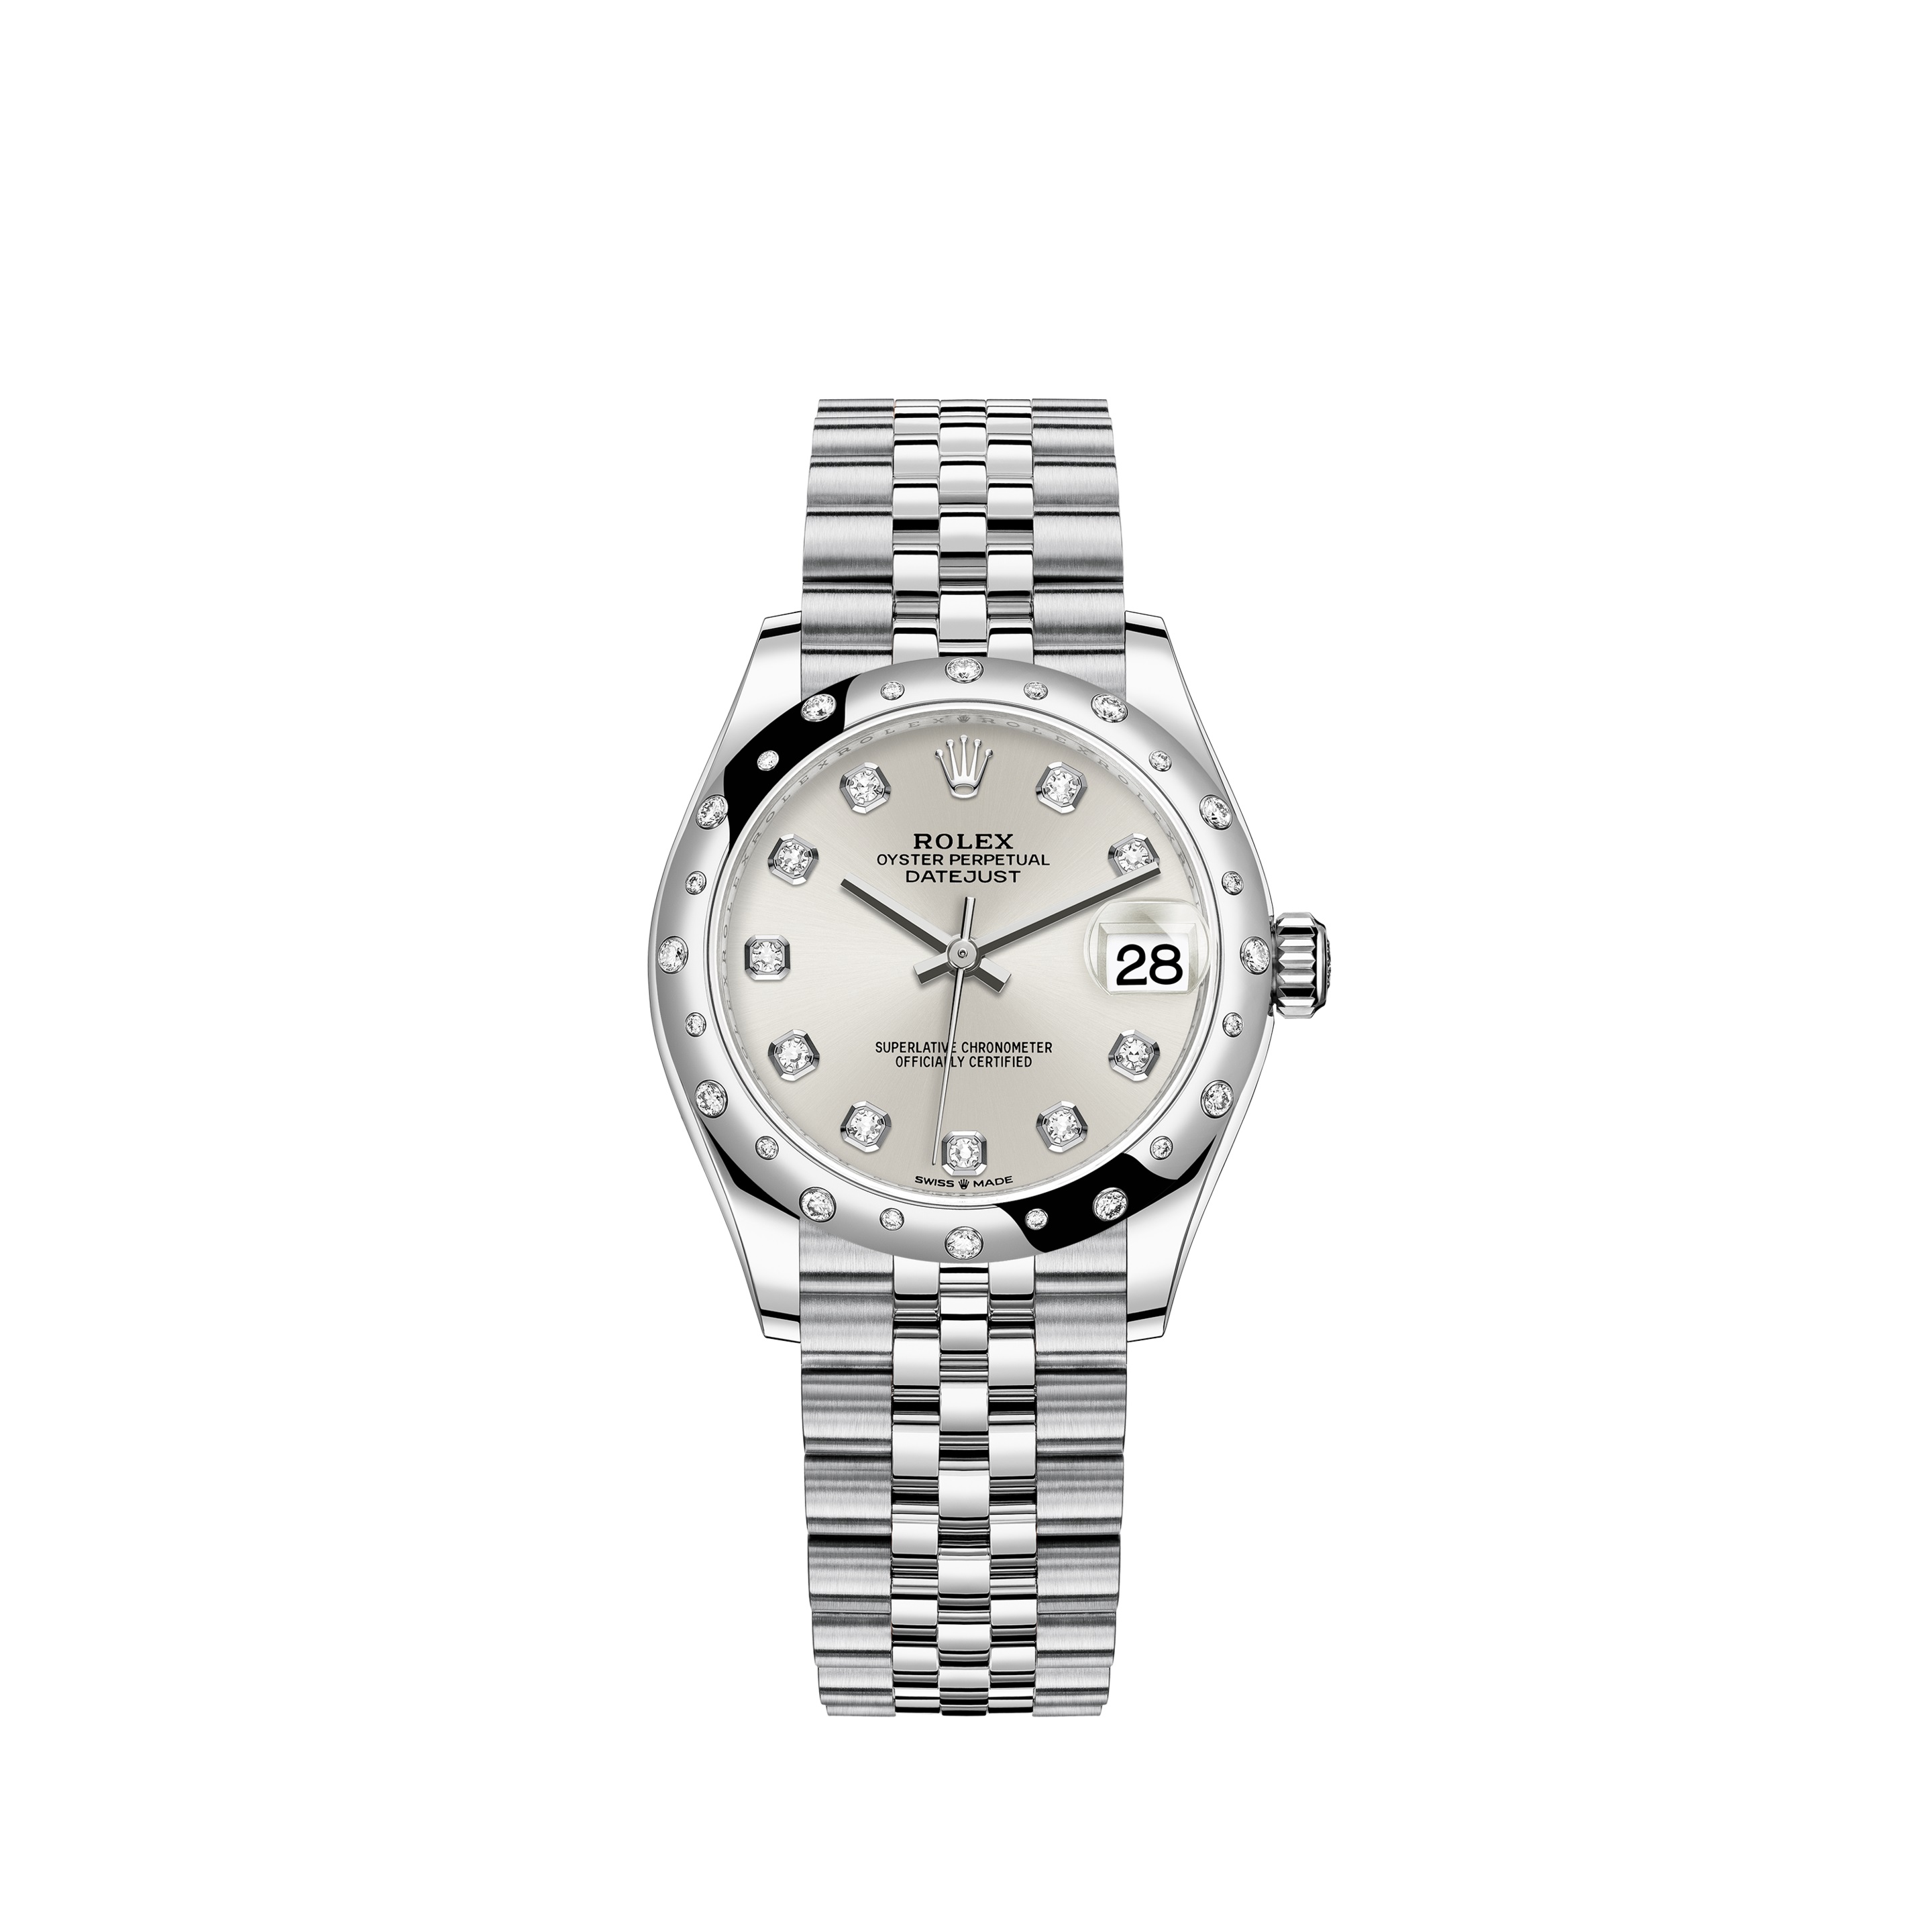 Datejust 31 278344RBR White Gold & Stainless Steel Watch (Silver Set with Diamonds)